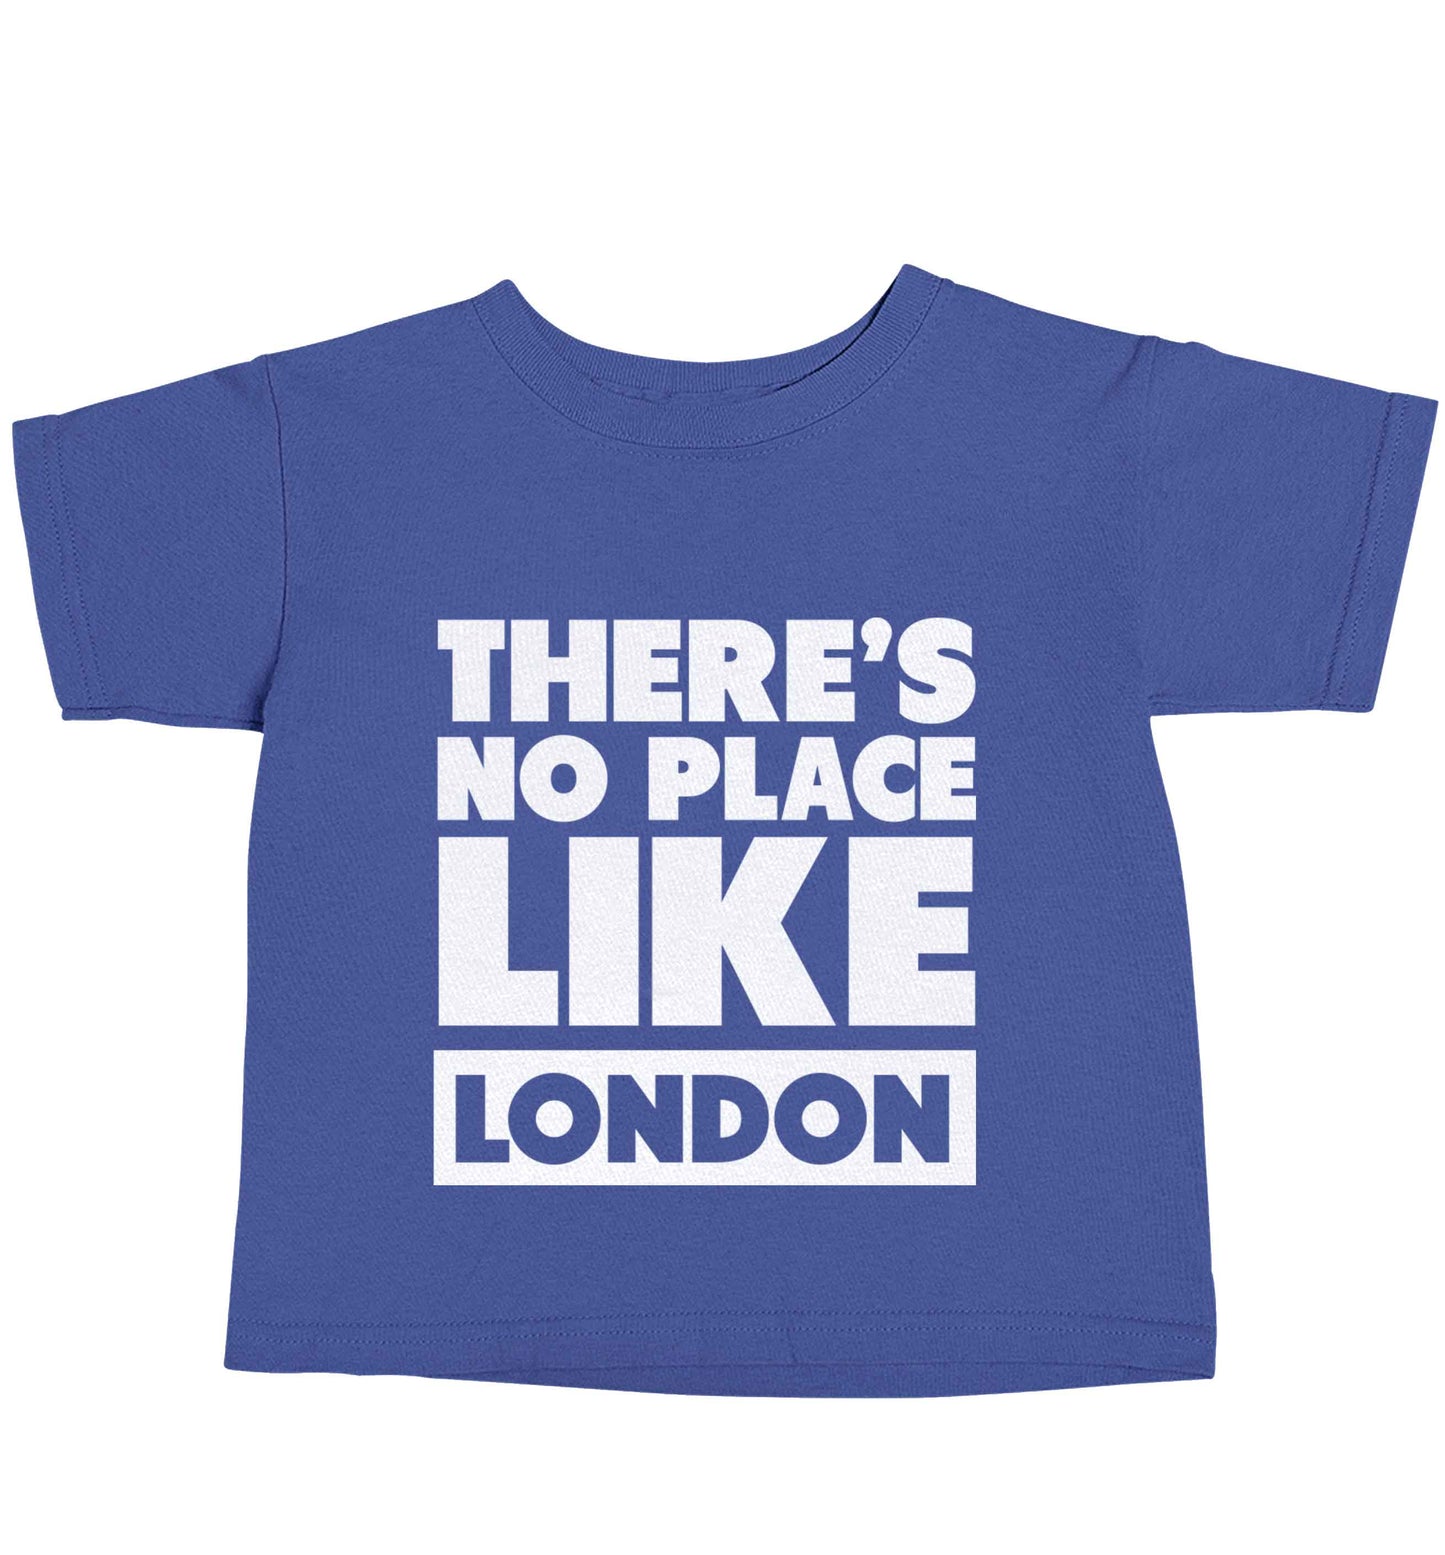 There's no place like England blue baby toddler Tshirt 2 Years